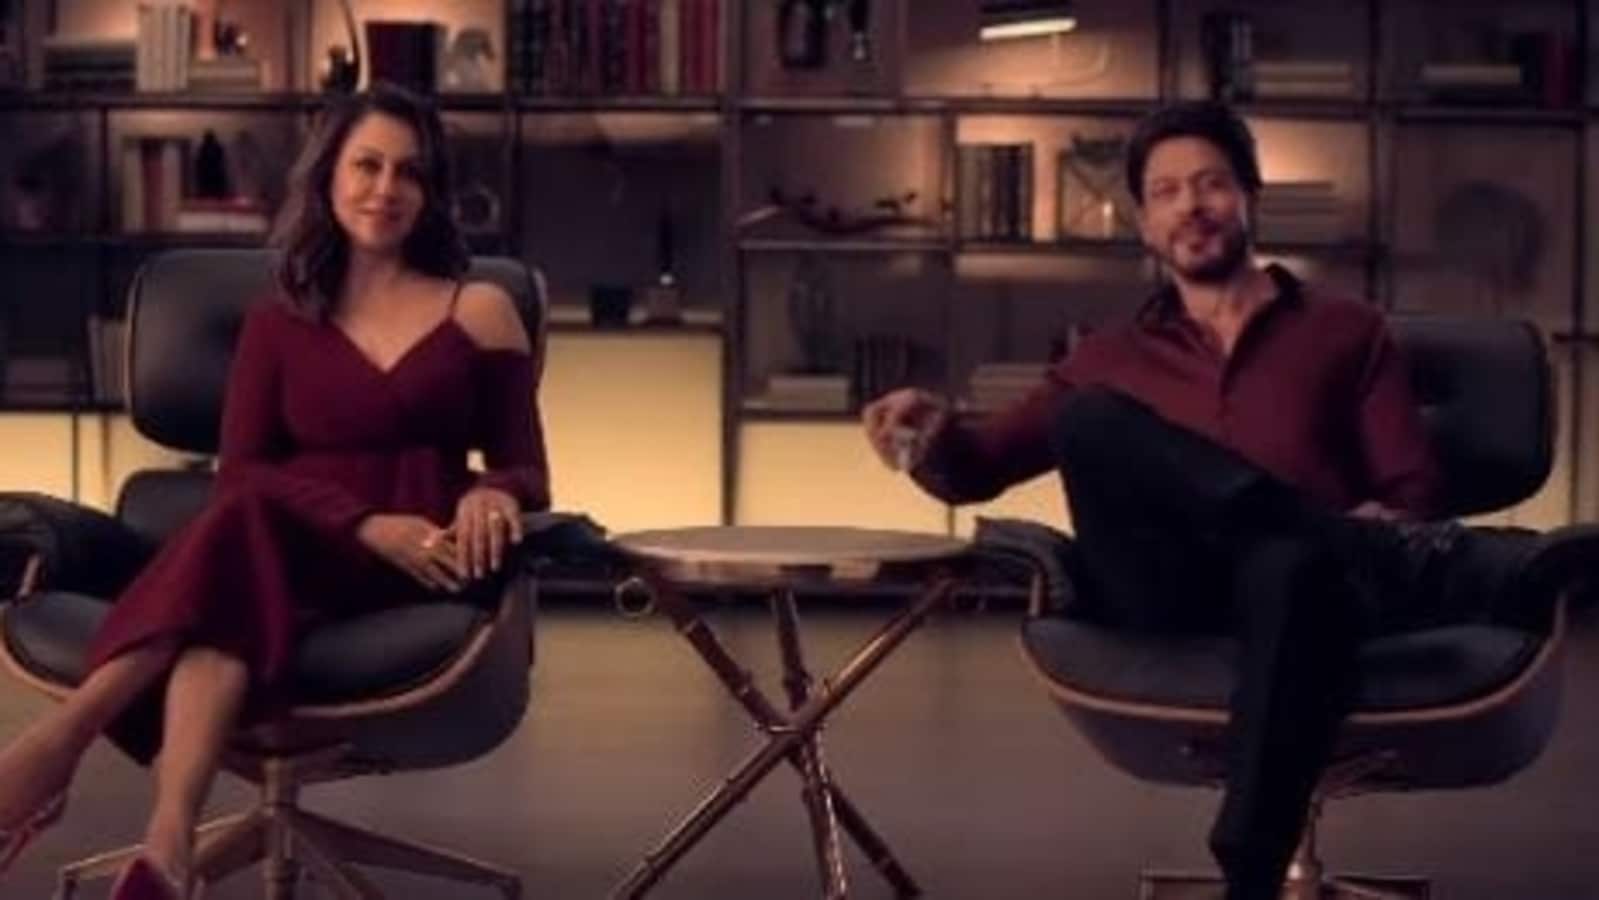 Shah Rukh Khan not allowed to 'disrupt the design' of Mannat because of wife Gauri Khan: 'She is a wonderful designer'